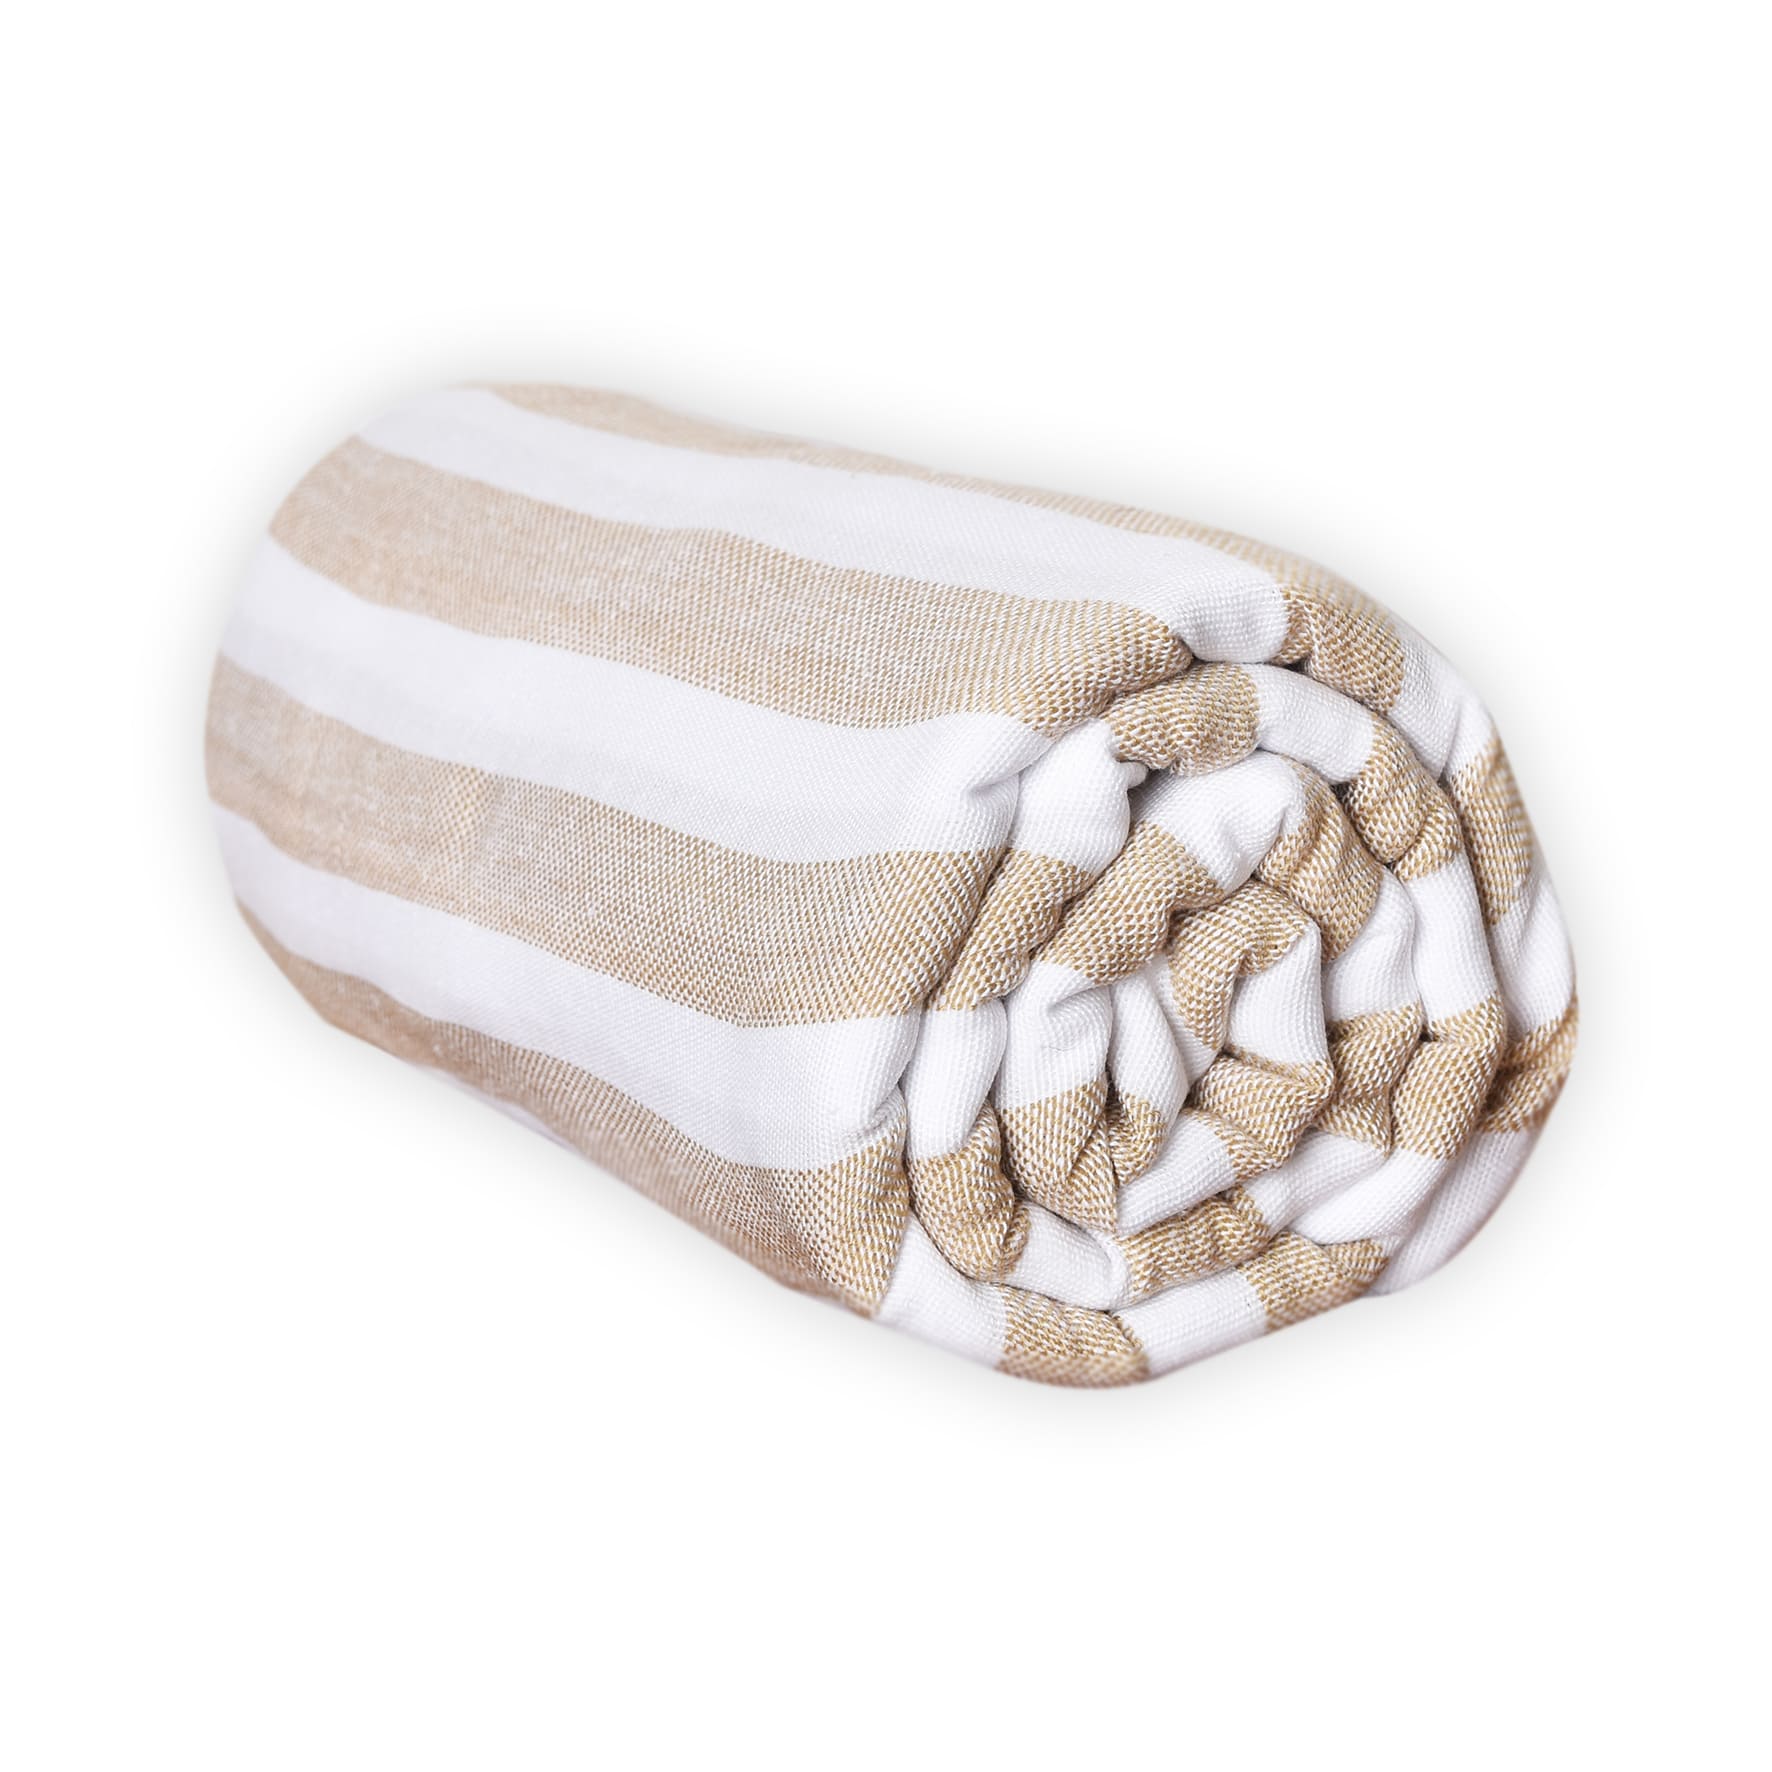 Sale Items / Las Bayadas - La Catalina Beach Blanket / This lovely lightly woven beach blanket is made in Mexico, using recycled cotton and the softest traditional Mexican fabrics.